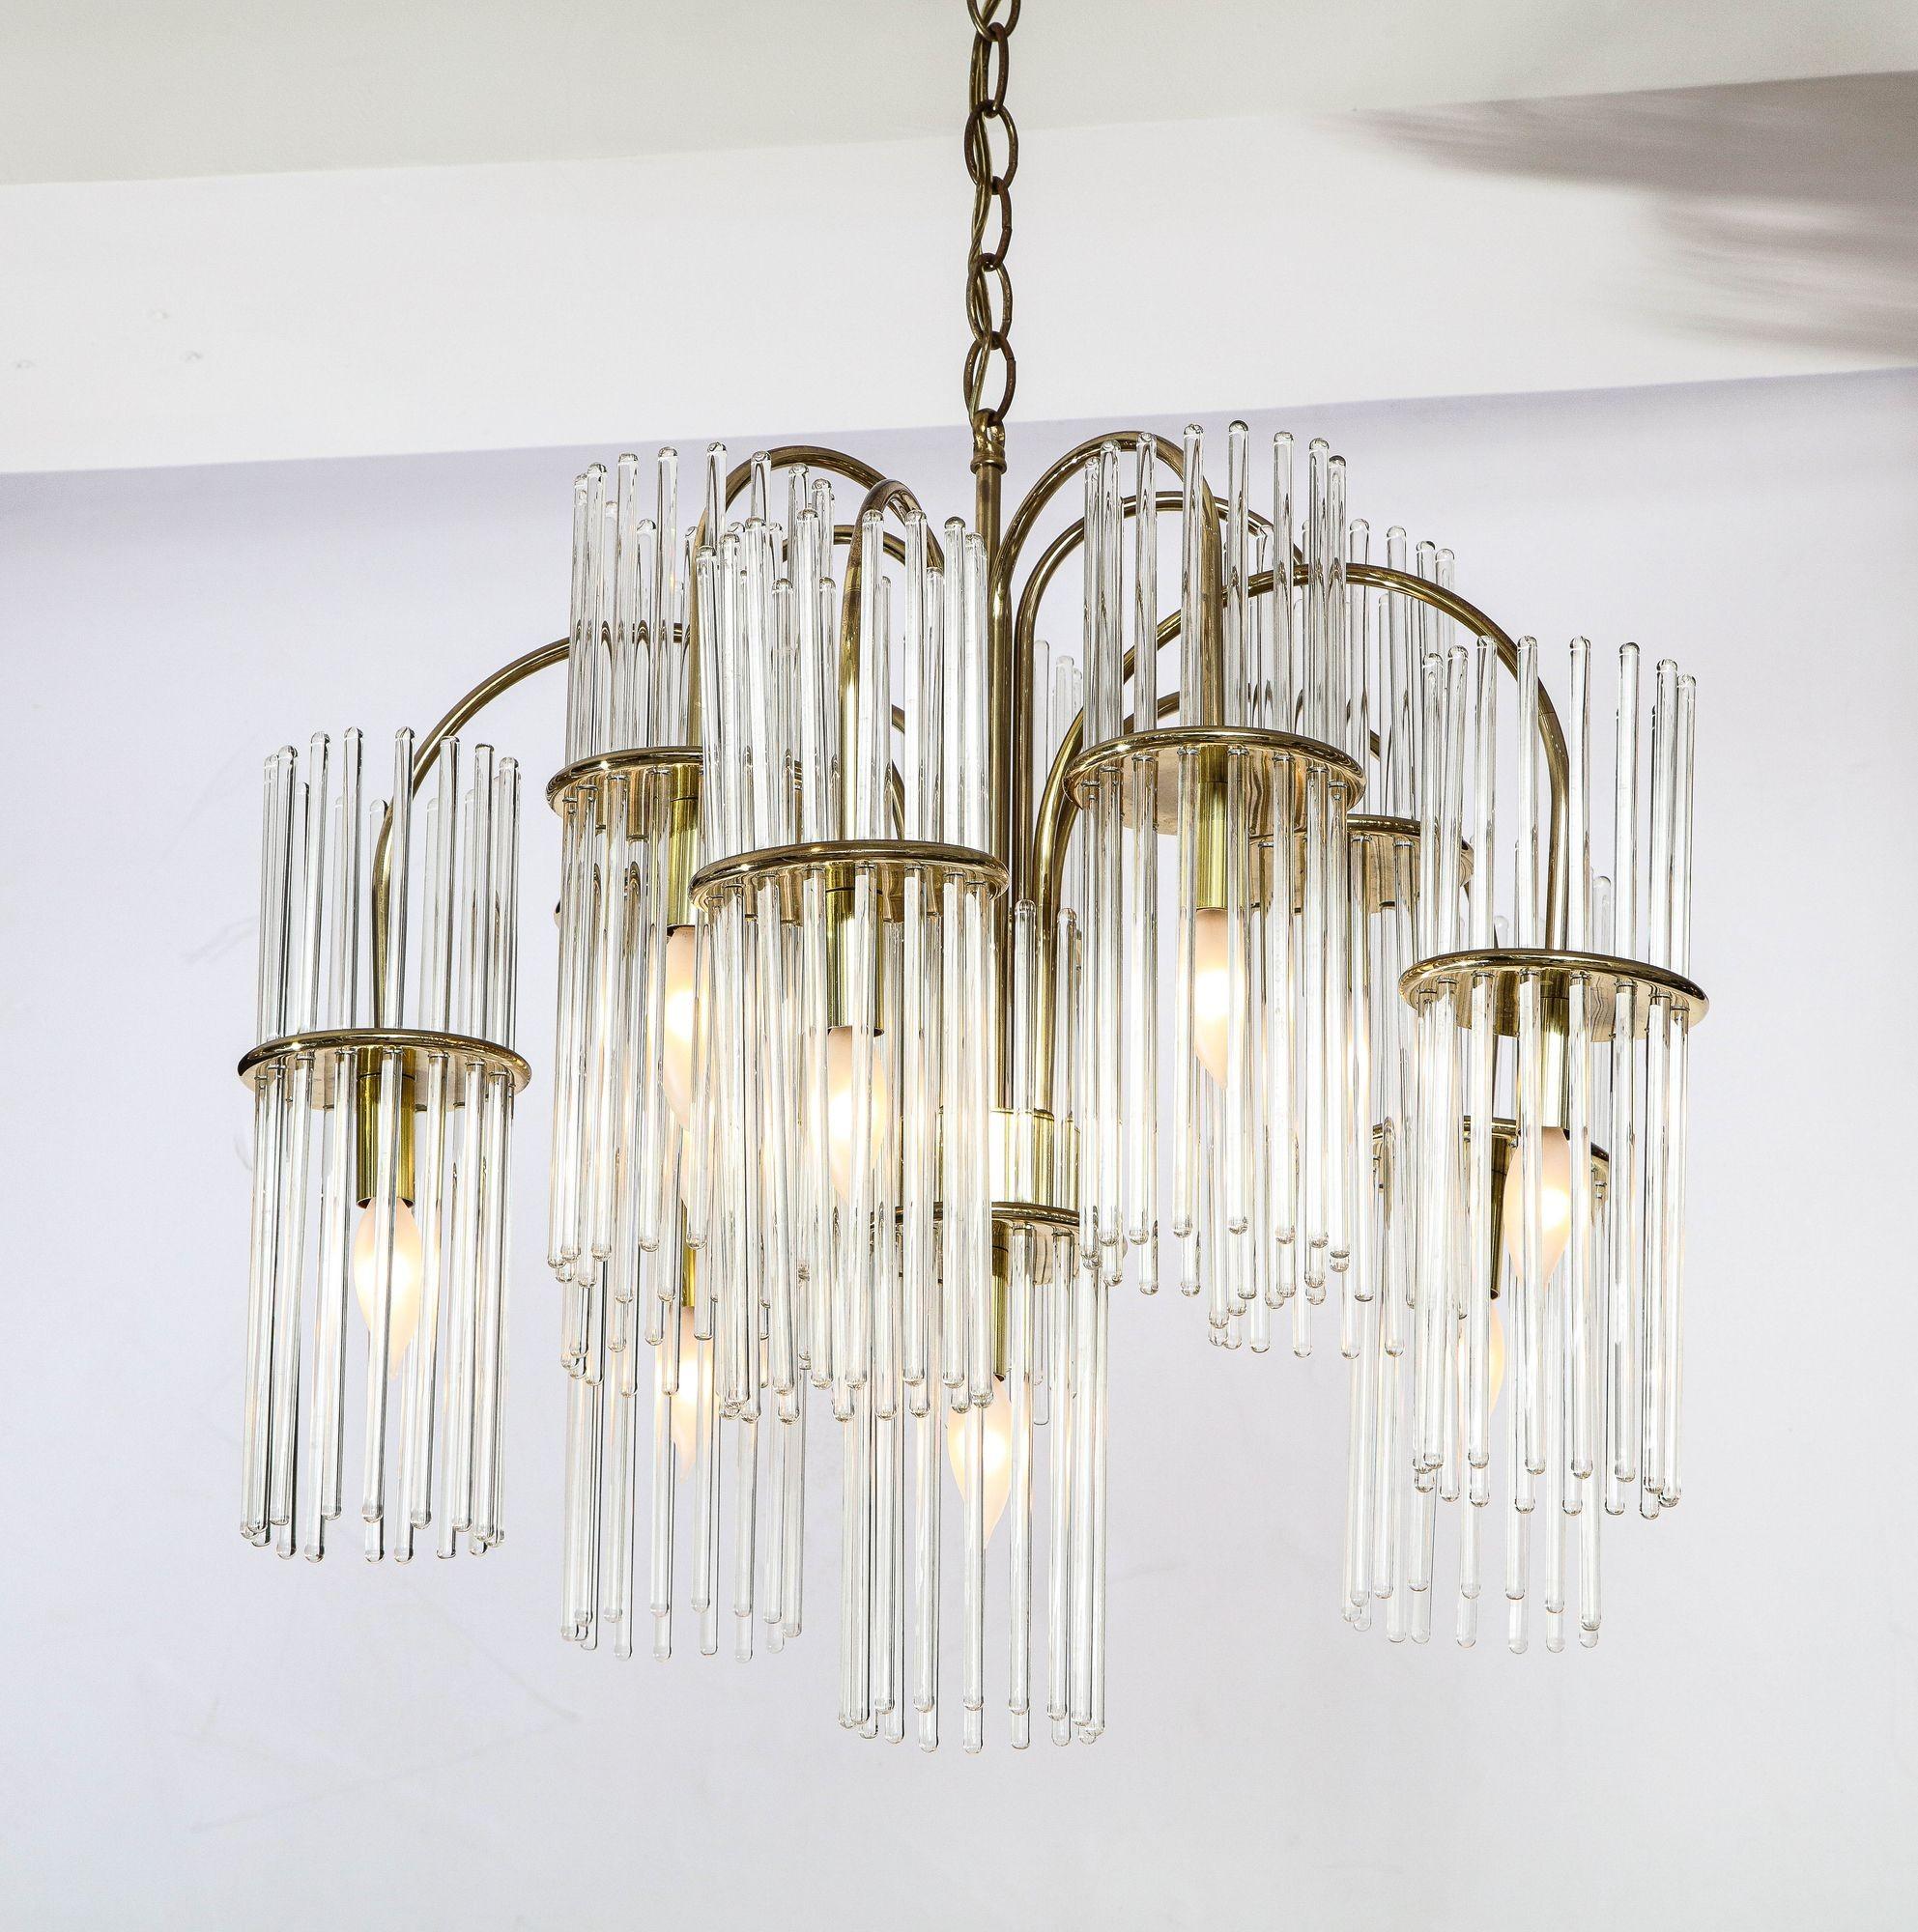 Glass rod chandelier pendant lamp by Gaetano Sciolari with ten lights tiered around the central light.